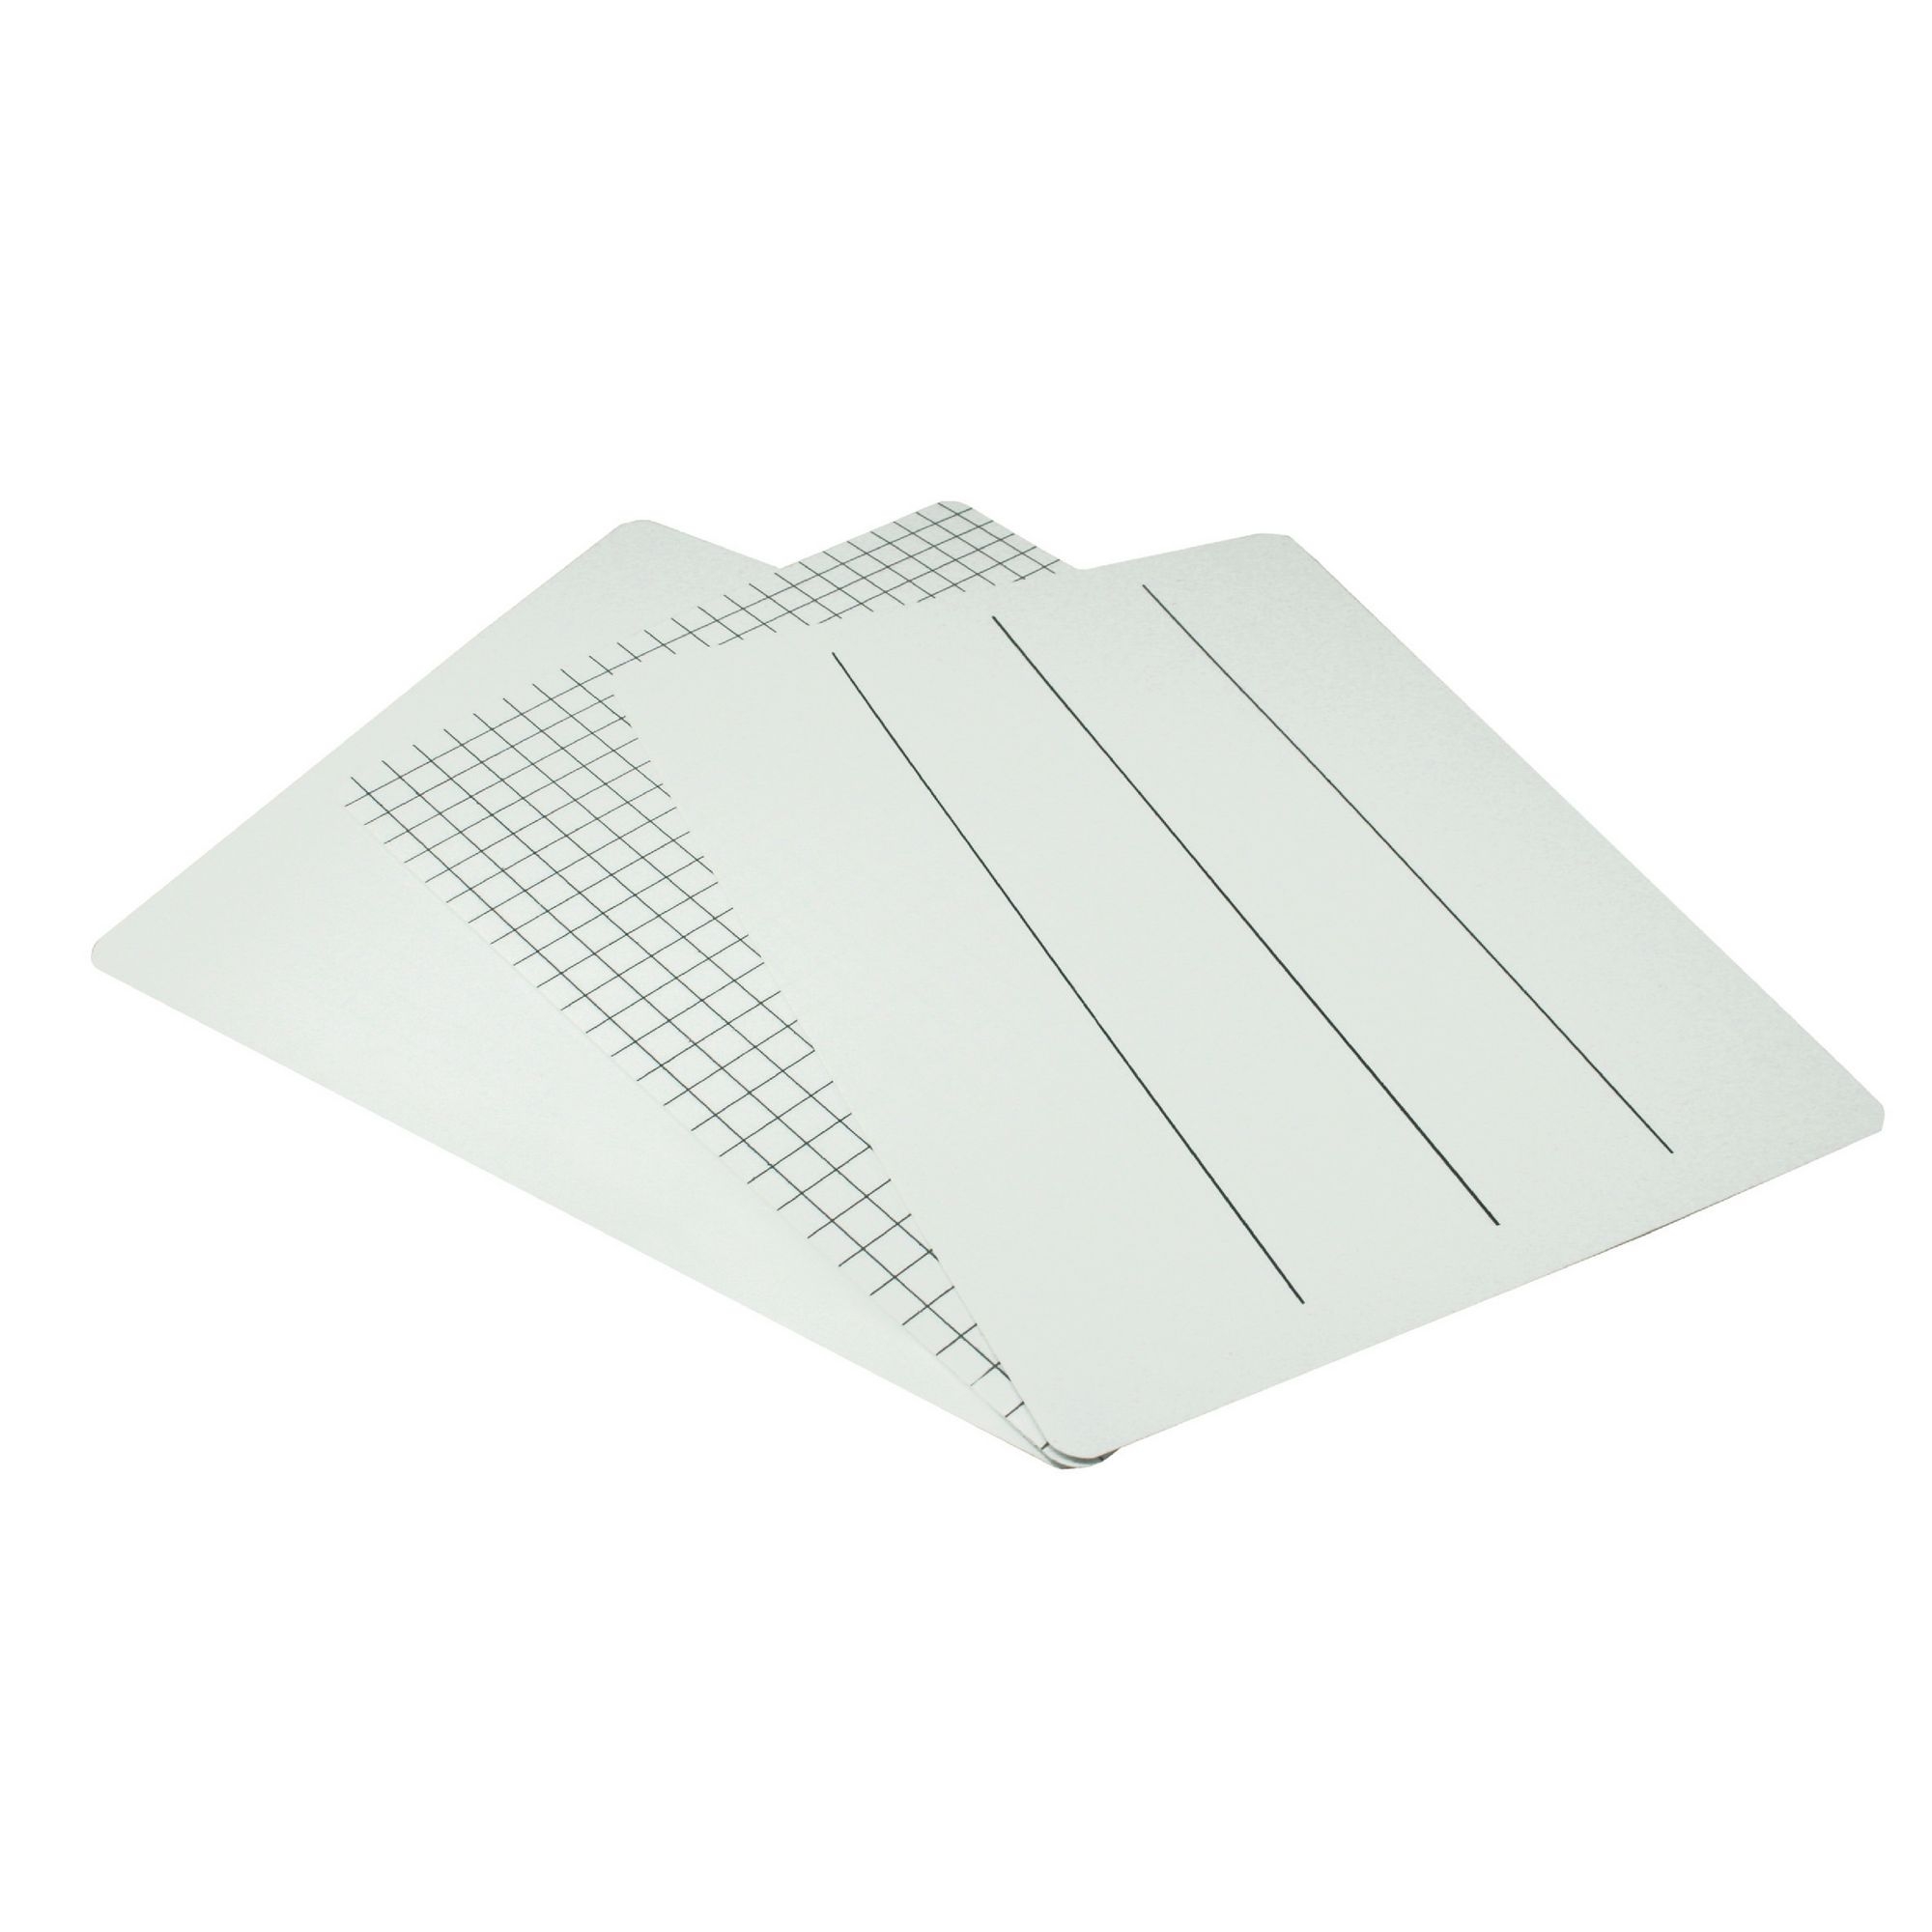 Classmates Lightweight Whiteboards - Non-magnetic - A4 Plain - Pack 35